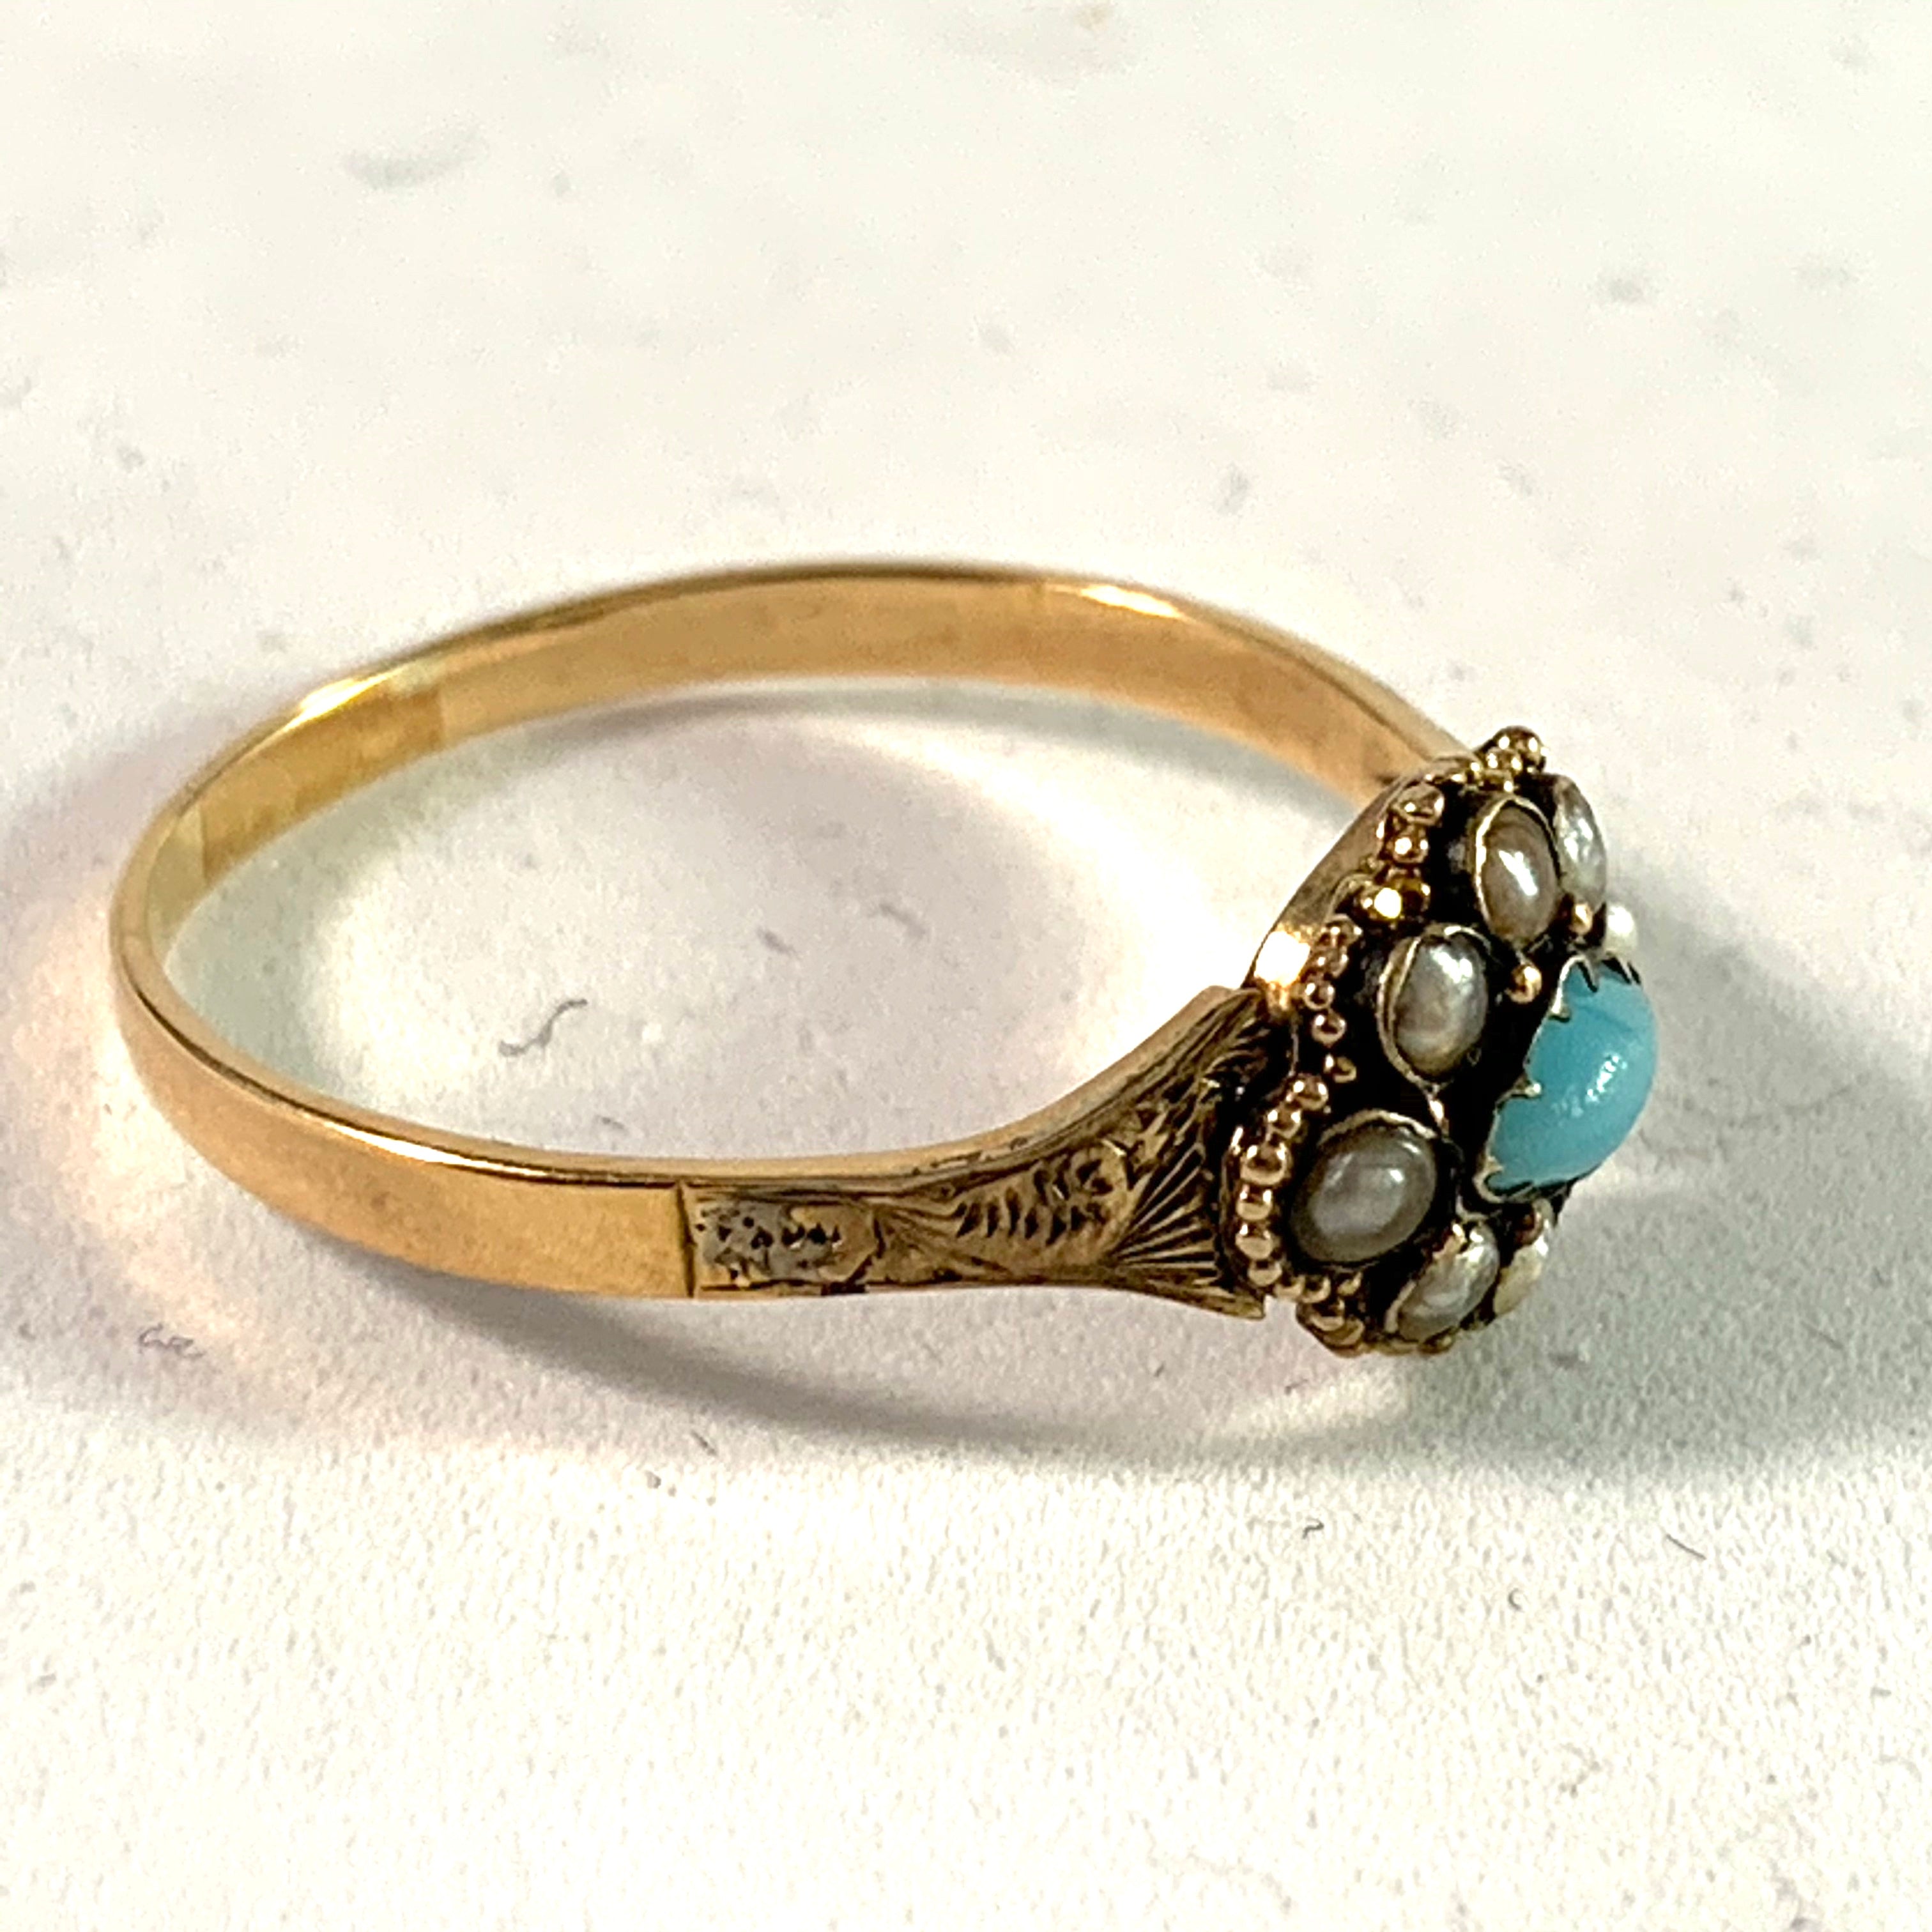 Antique Victorian 18k Gold Seed Pearl Paste Ring.